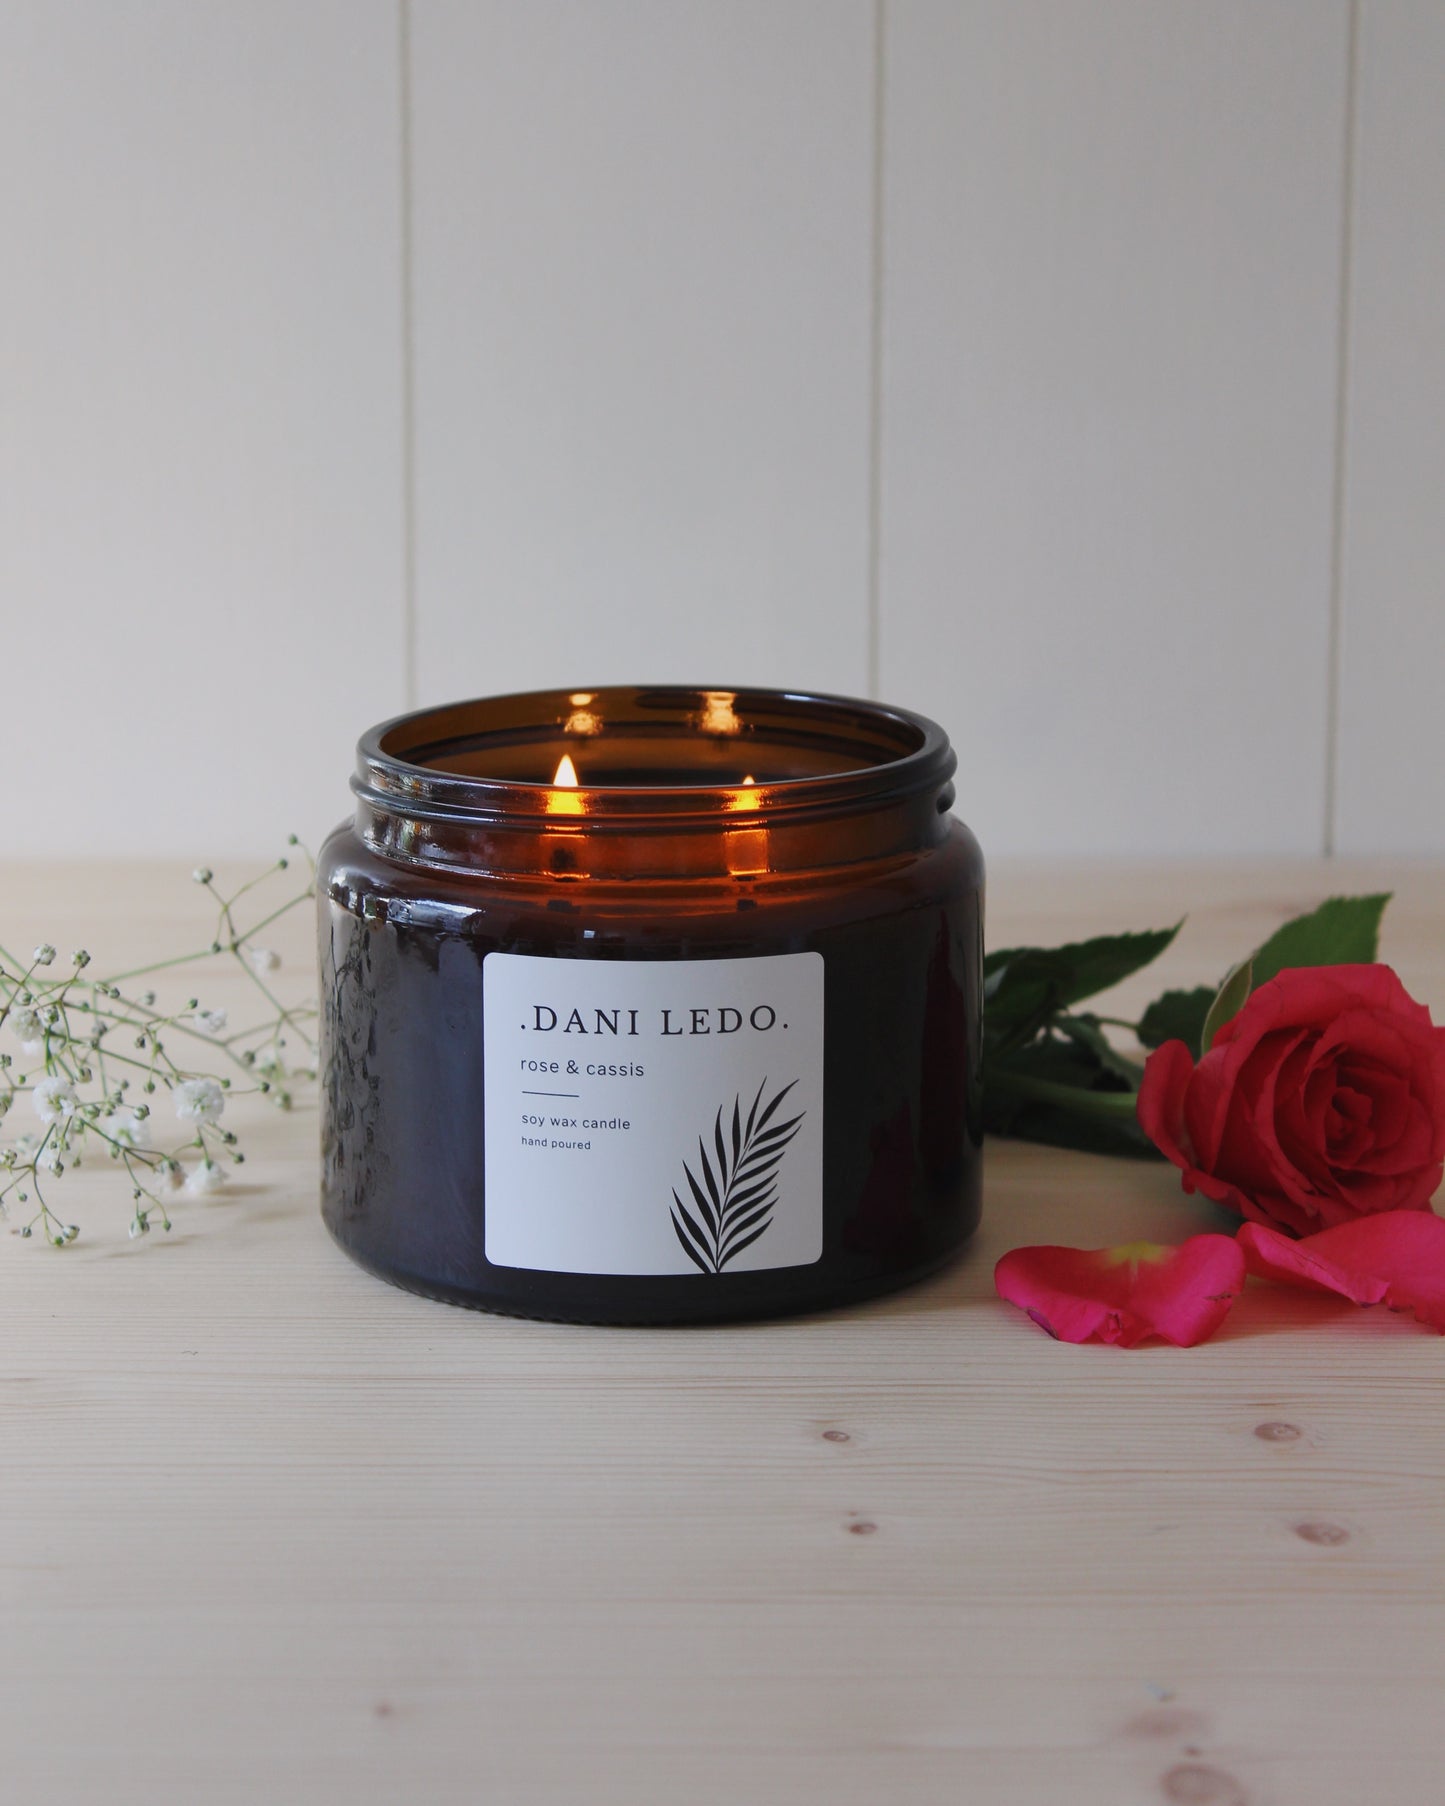 Rose & Cassis Double Wick Candle